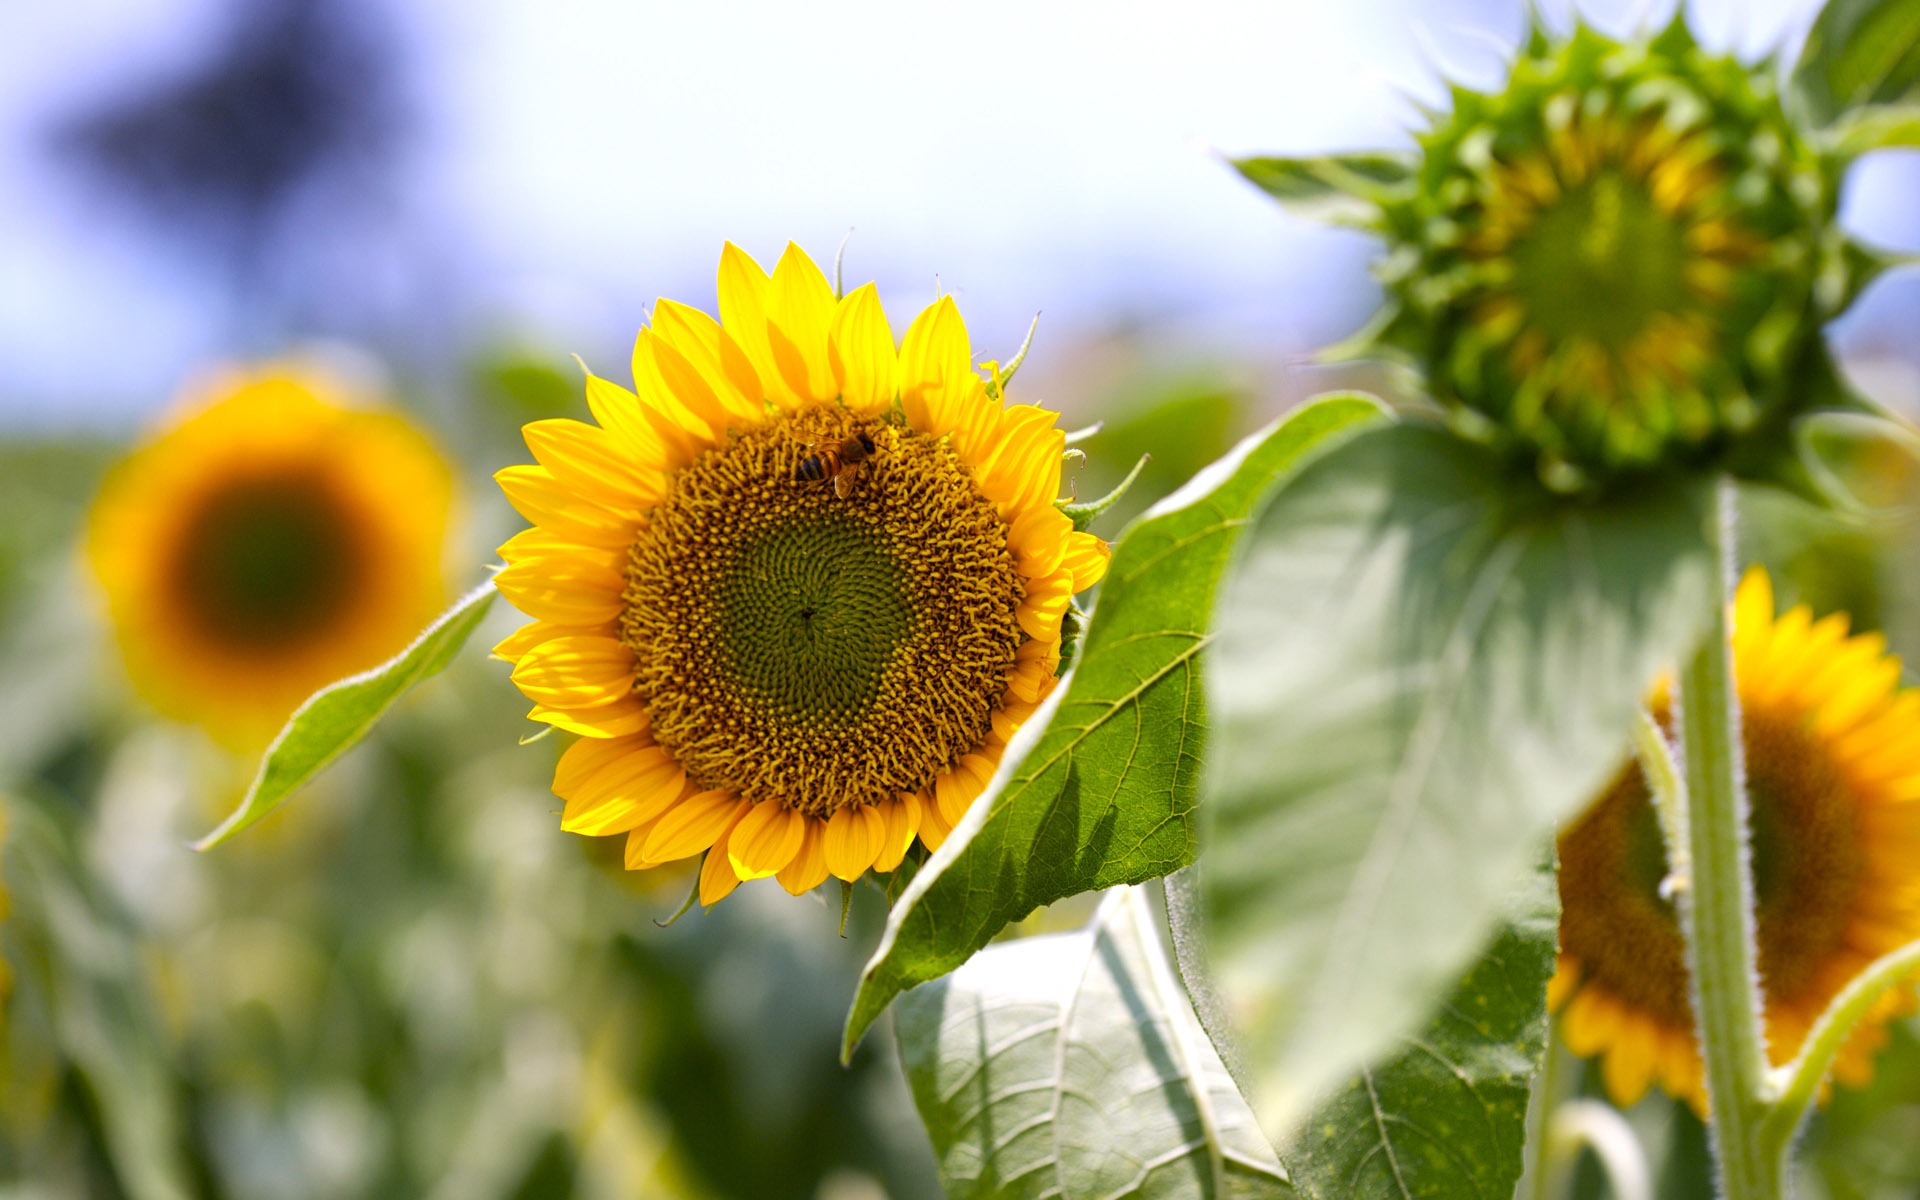 Sunny sunflower photo HD Wallpapers #21 - 1920x1200